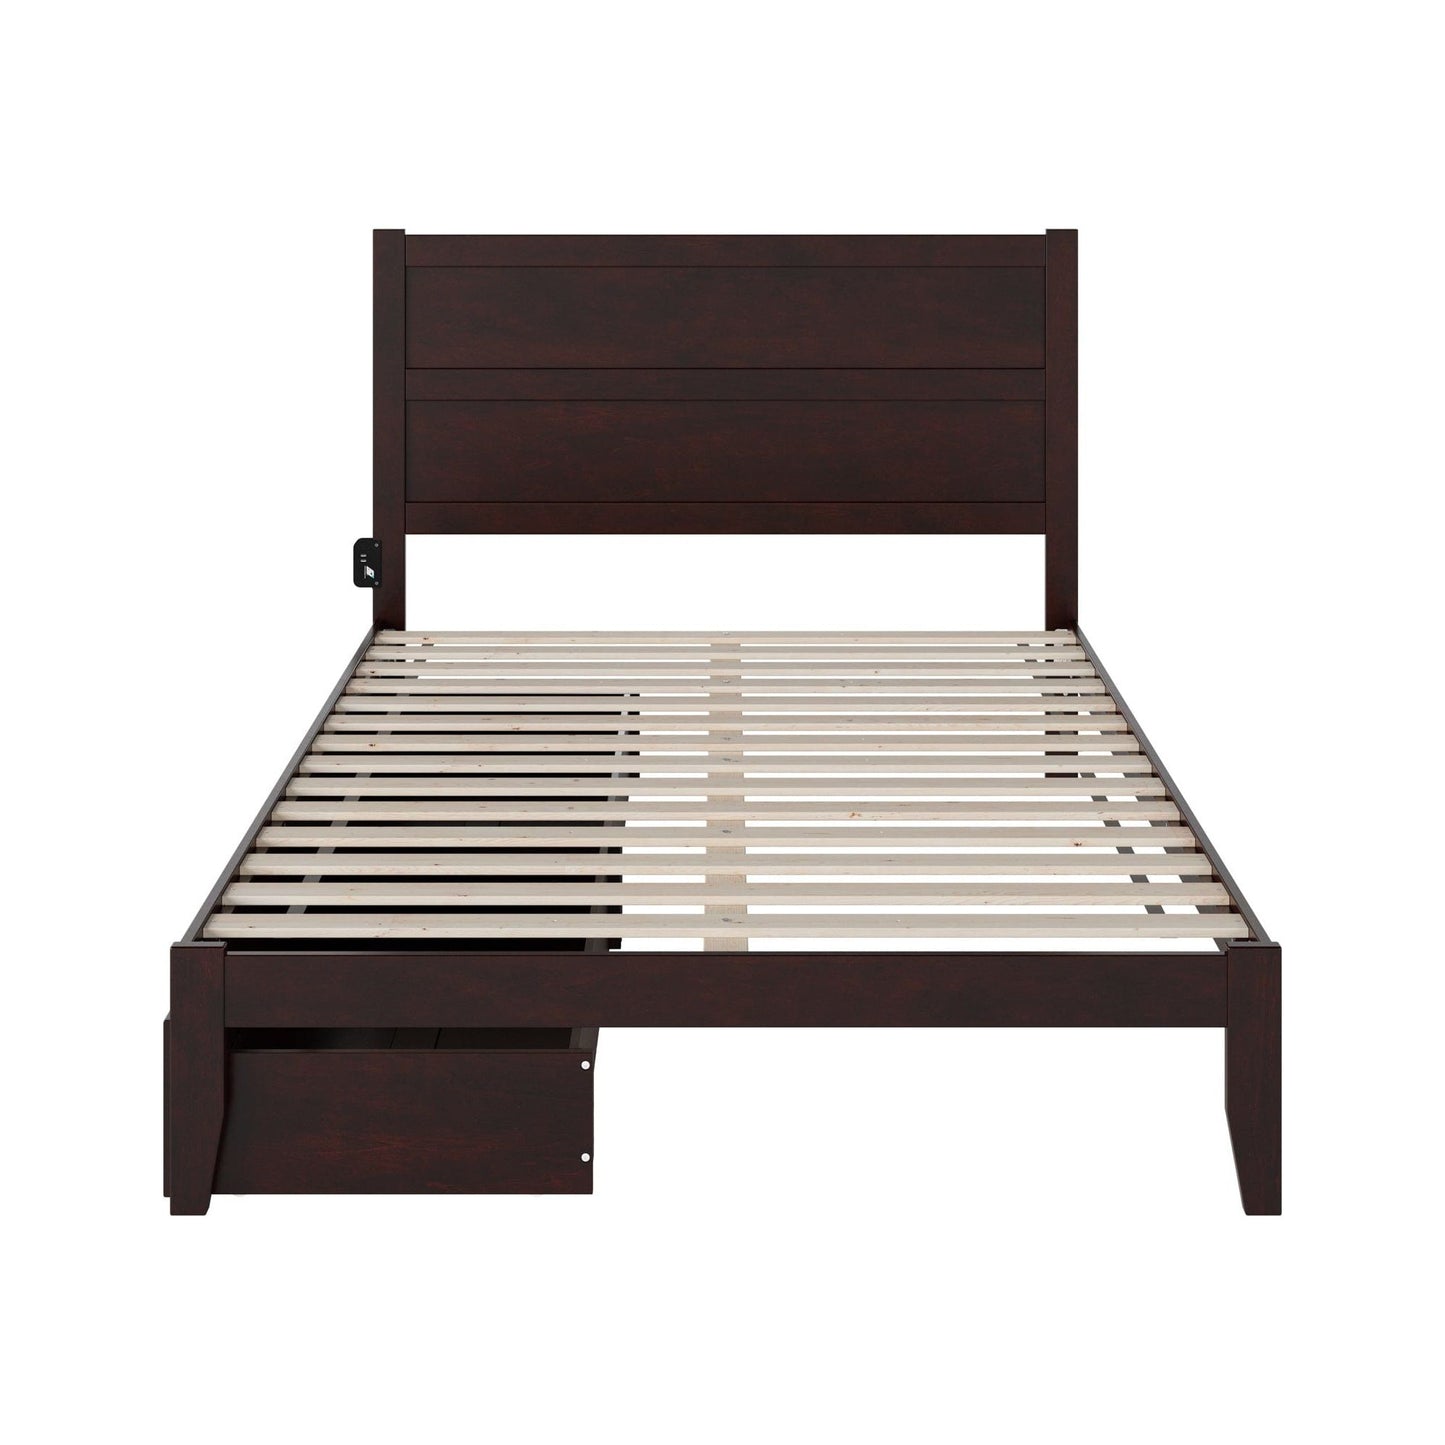 AFI Furnishings NoHo Queen Bed with 2 Drawers in Espresso